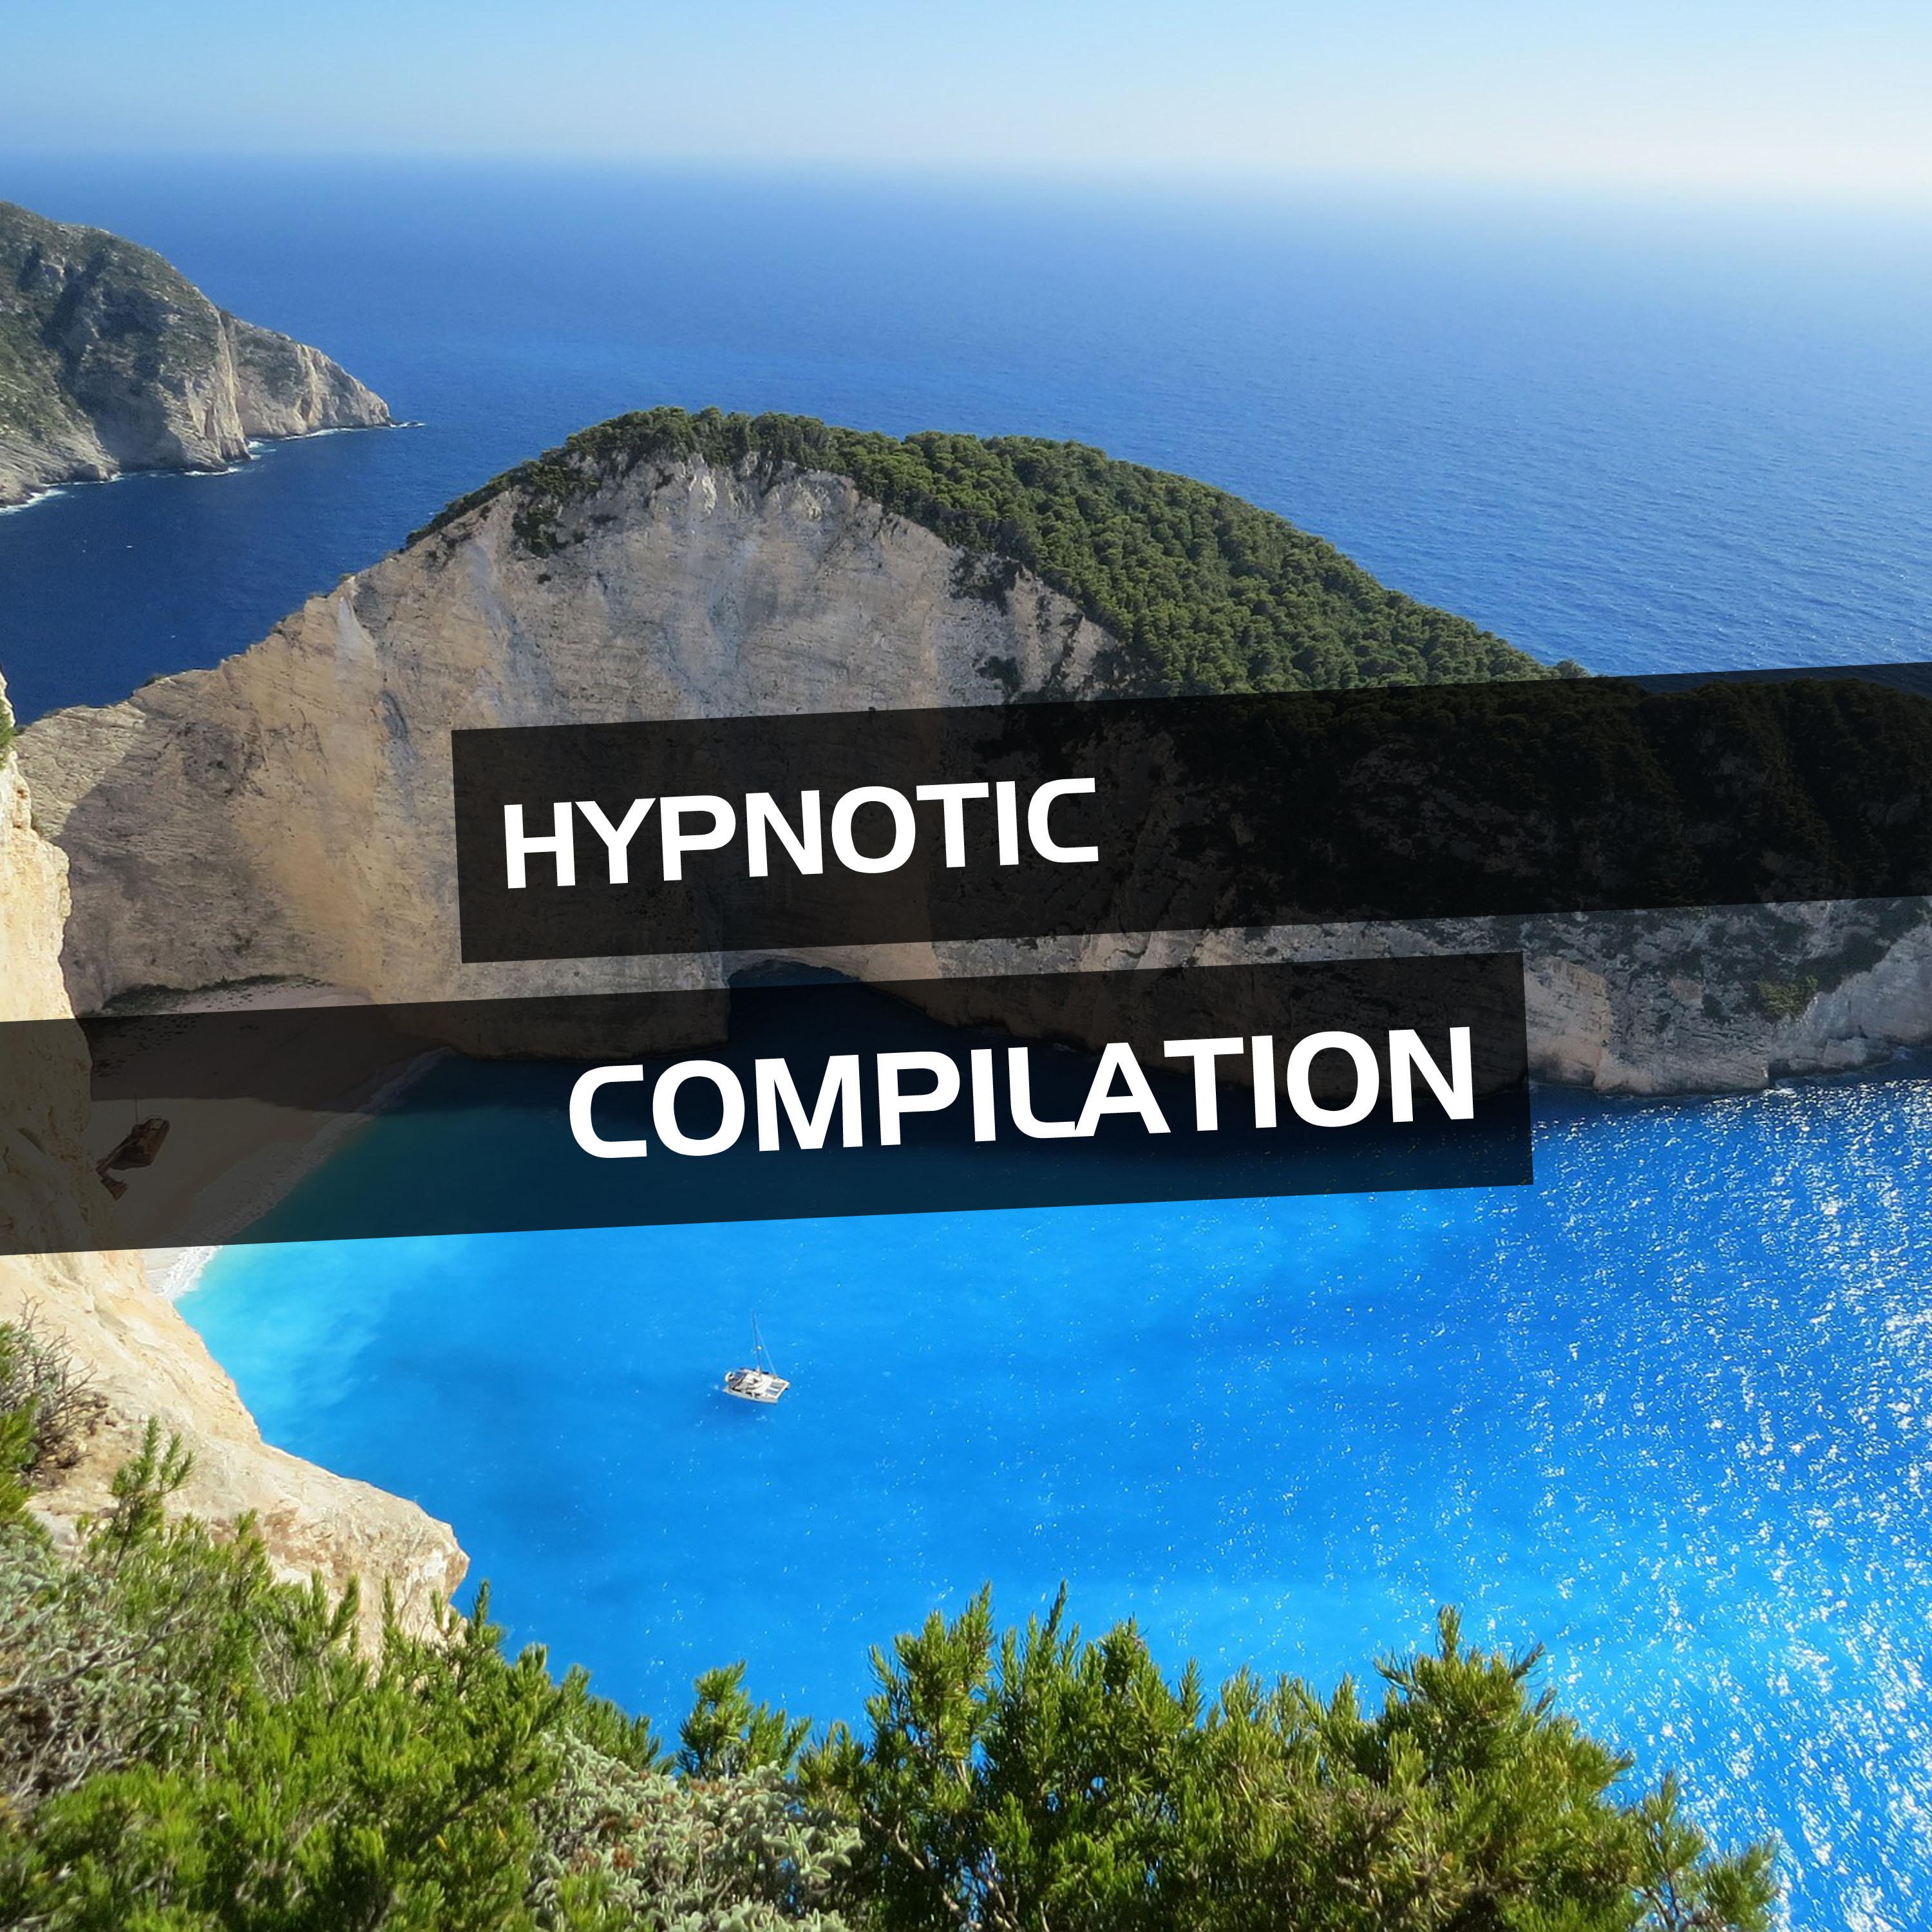 Hypnotic Compilation of Relaxing Spa Music